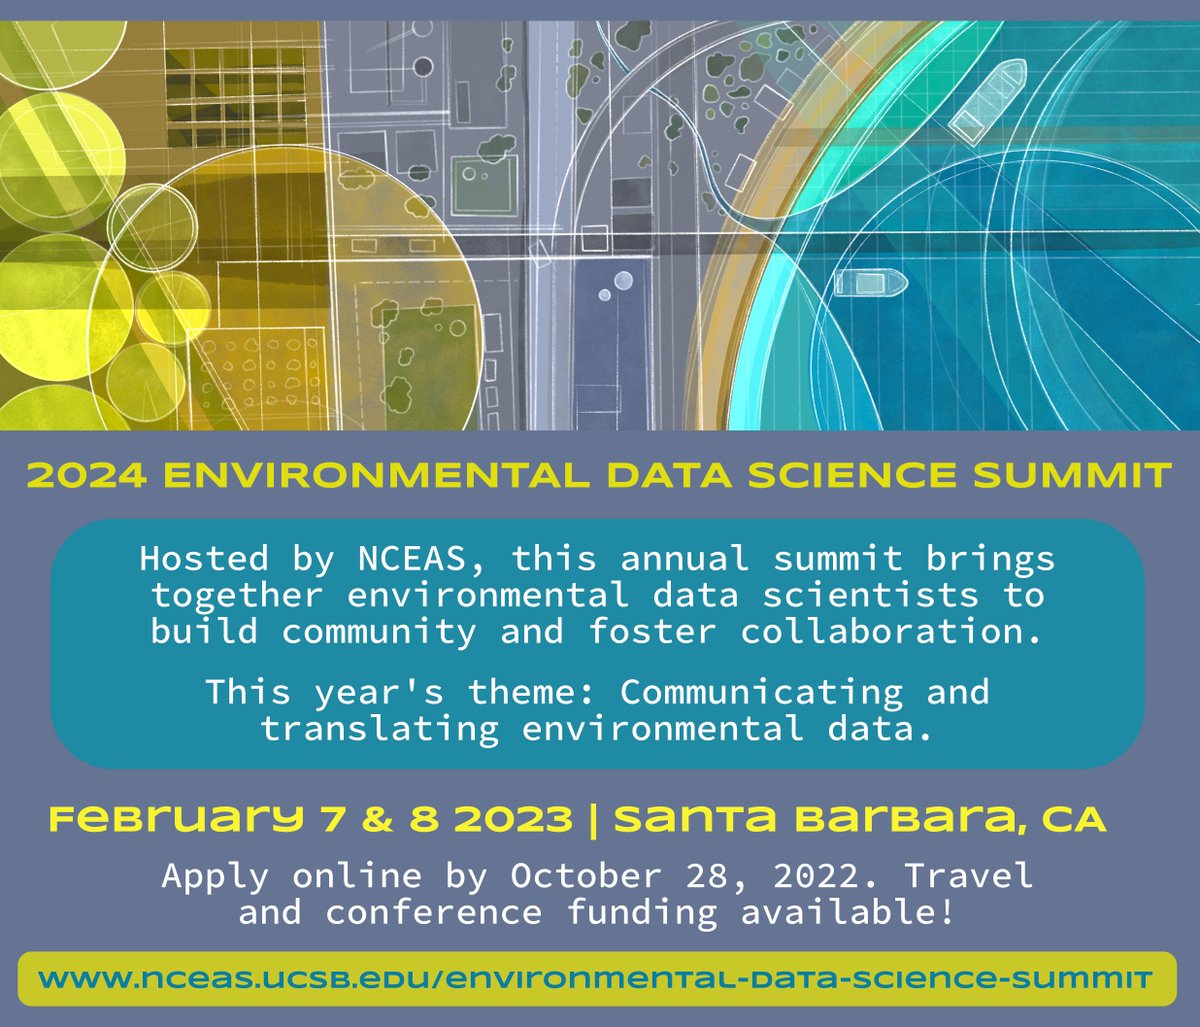 Applications are now open! 🎉 We can't wait for the second year of our Environmental Data Science Summit - this time with a theme of communicating and translating environmental data. Interested? Apply by 10/2. Full funding available for ~60 participants. buff.ly/3DC5daw